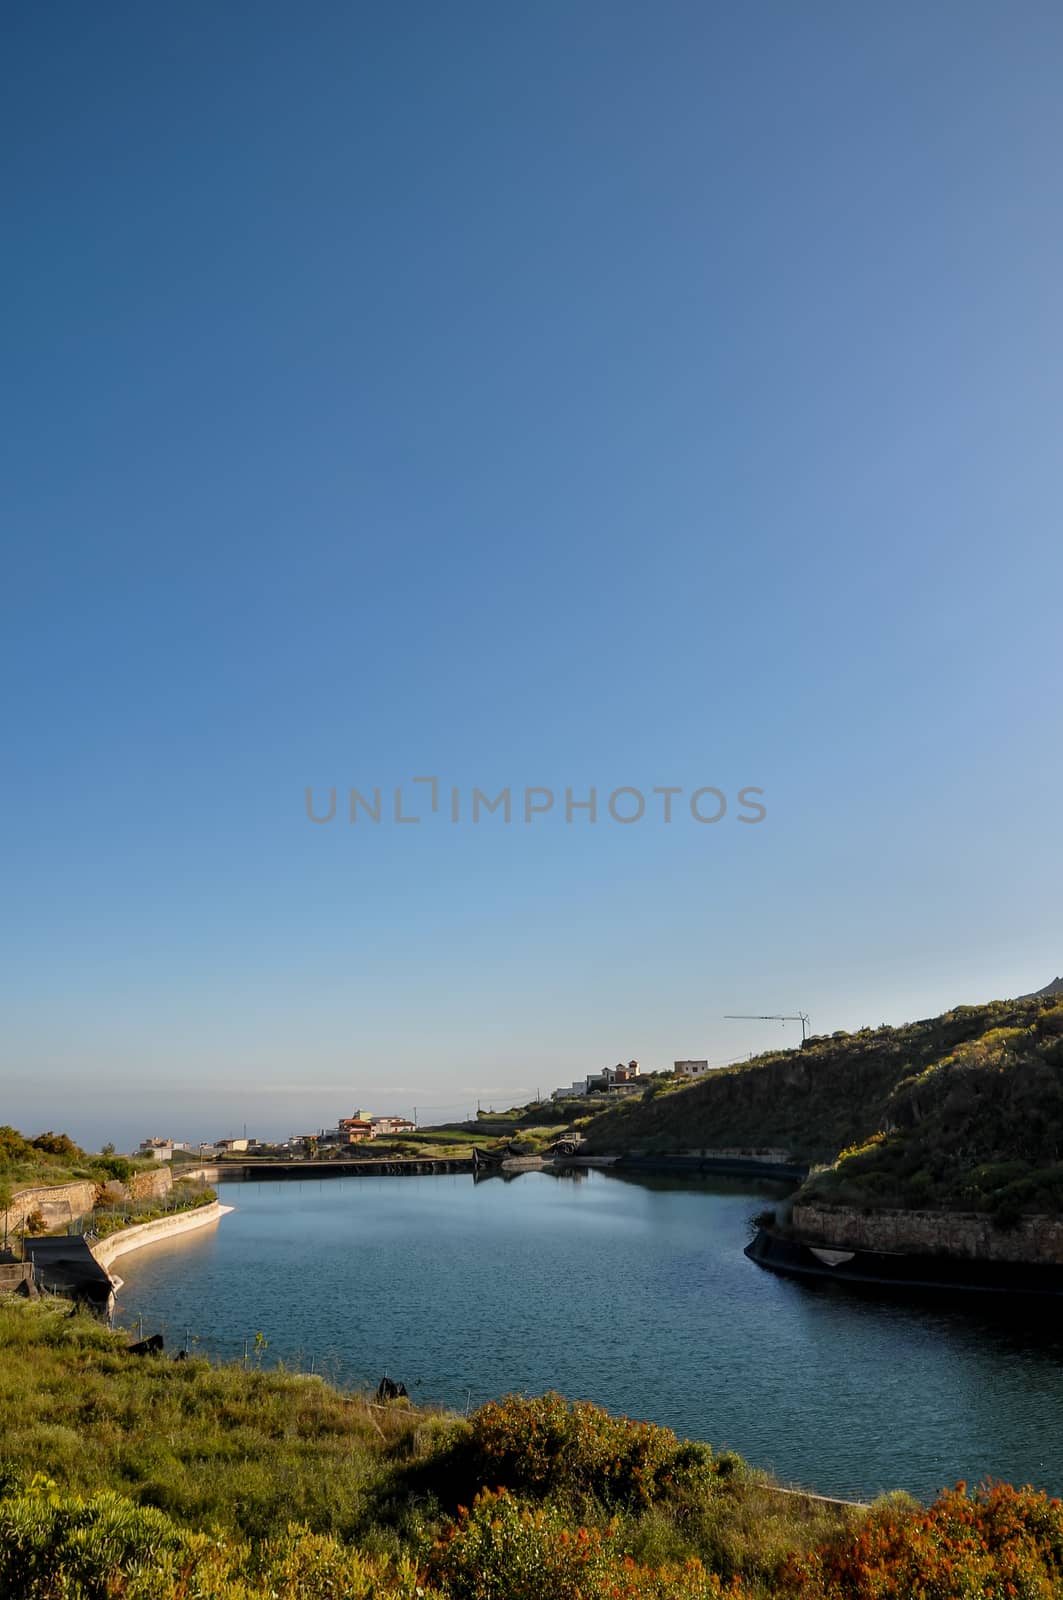 Lake and Dam on a Ravine in Tenerife Canary Islands Spain